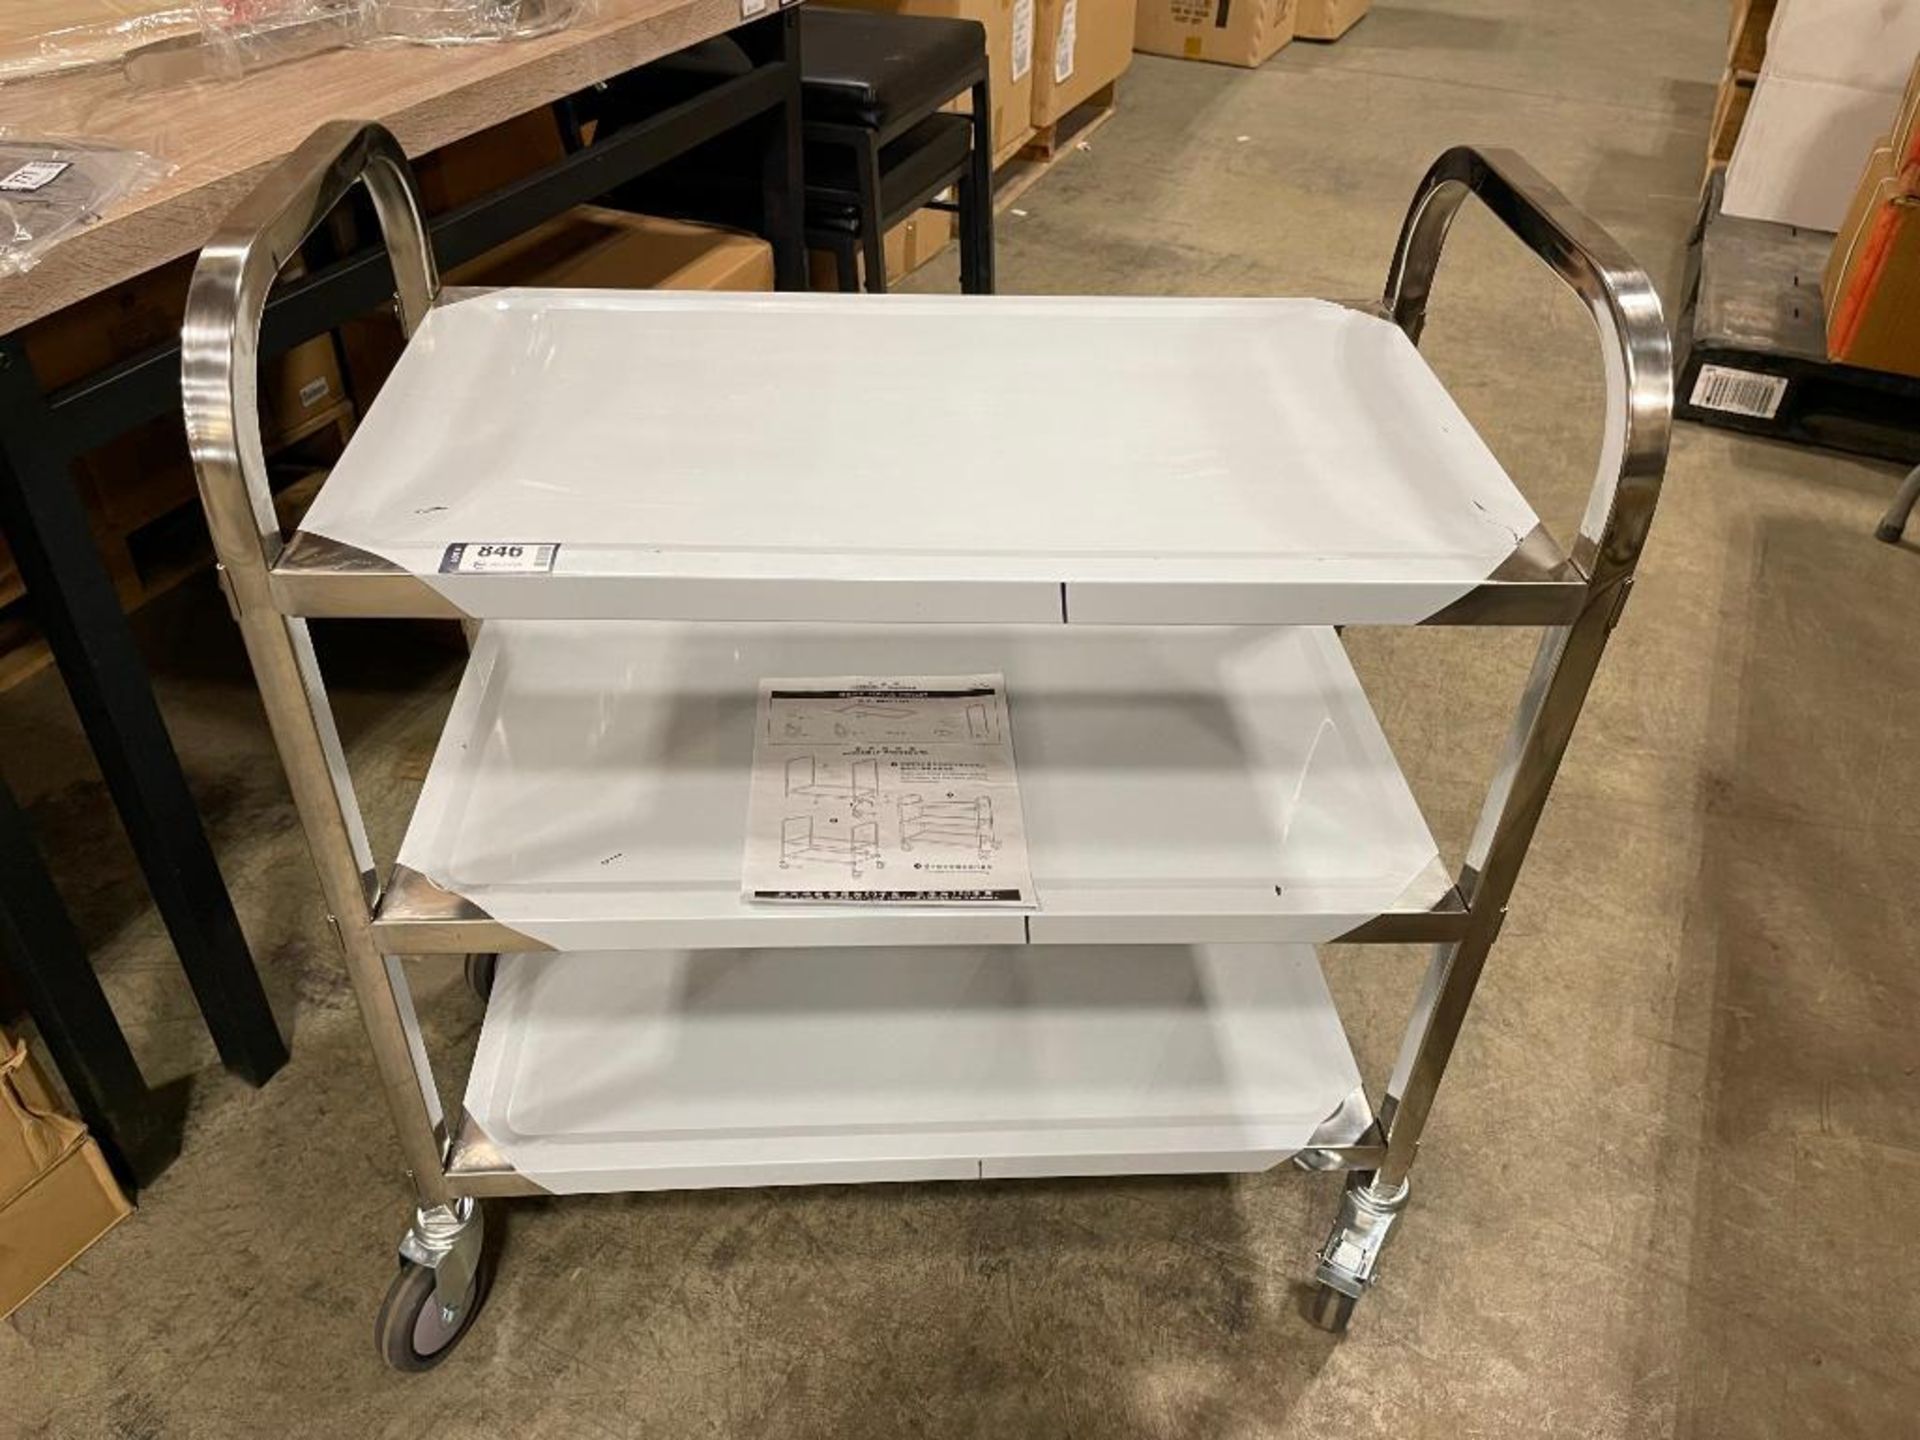 27" X 15" STAINLESS STEEL 3 TIER BUSSING CART - NEW - OMCAN 24418 - Image 2 of 5